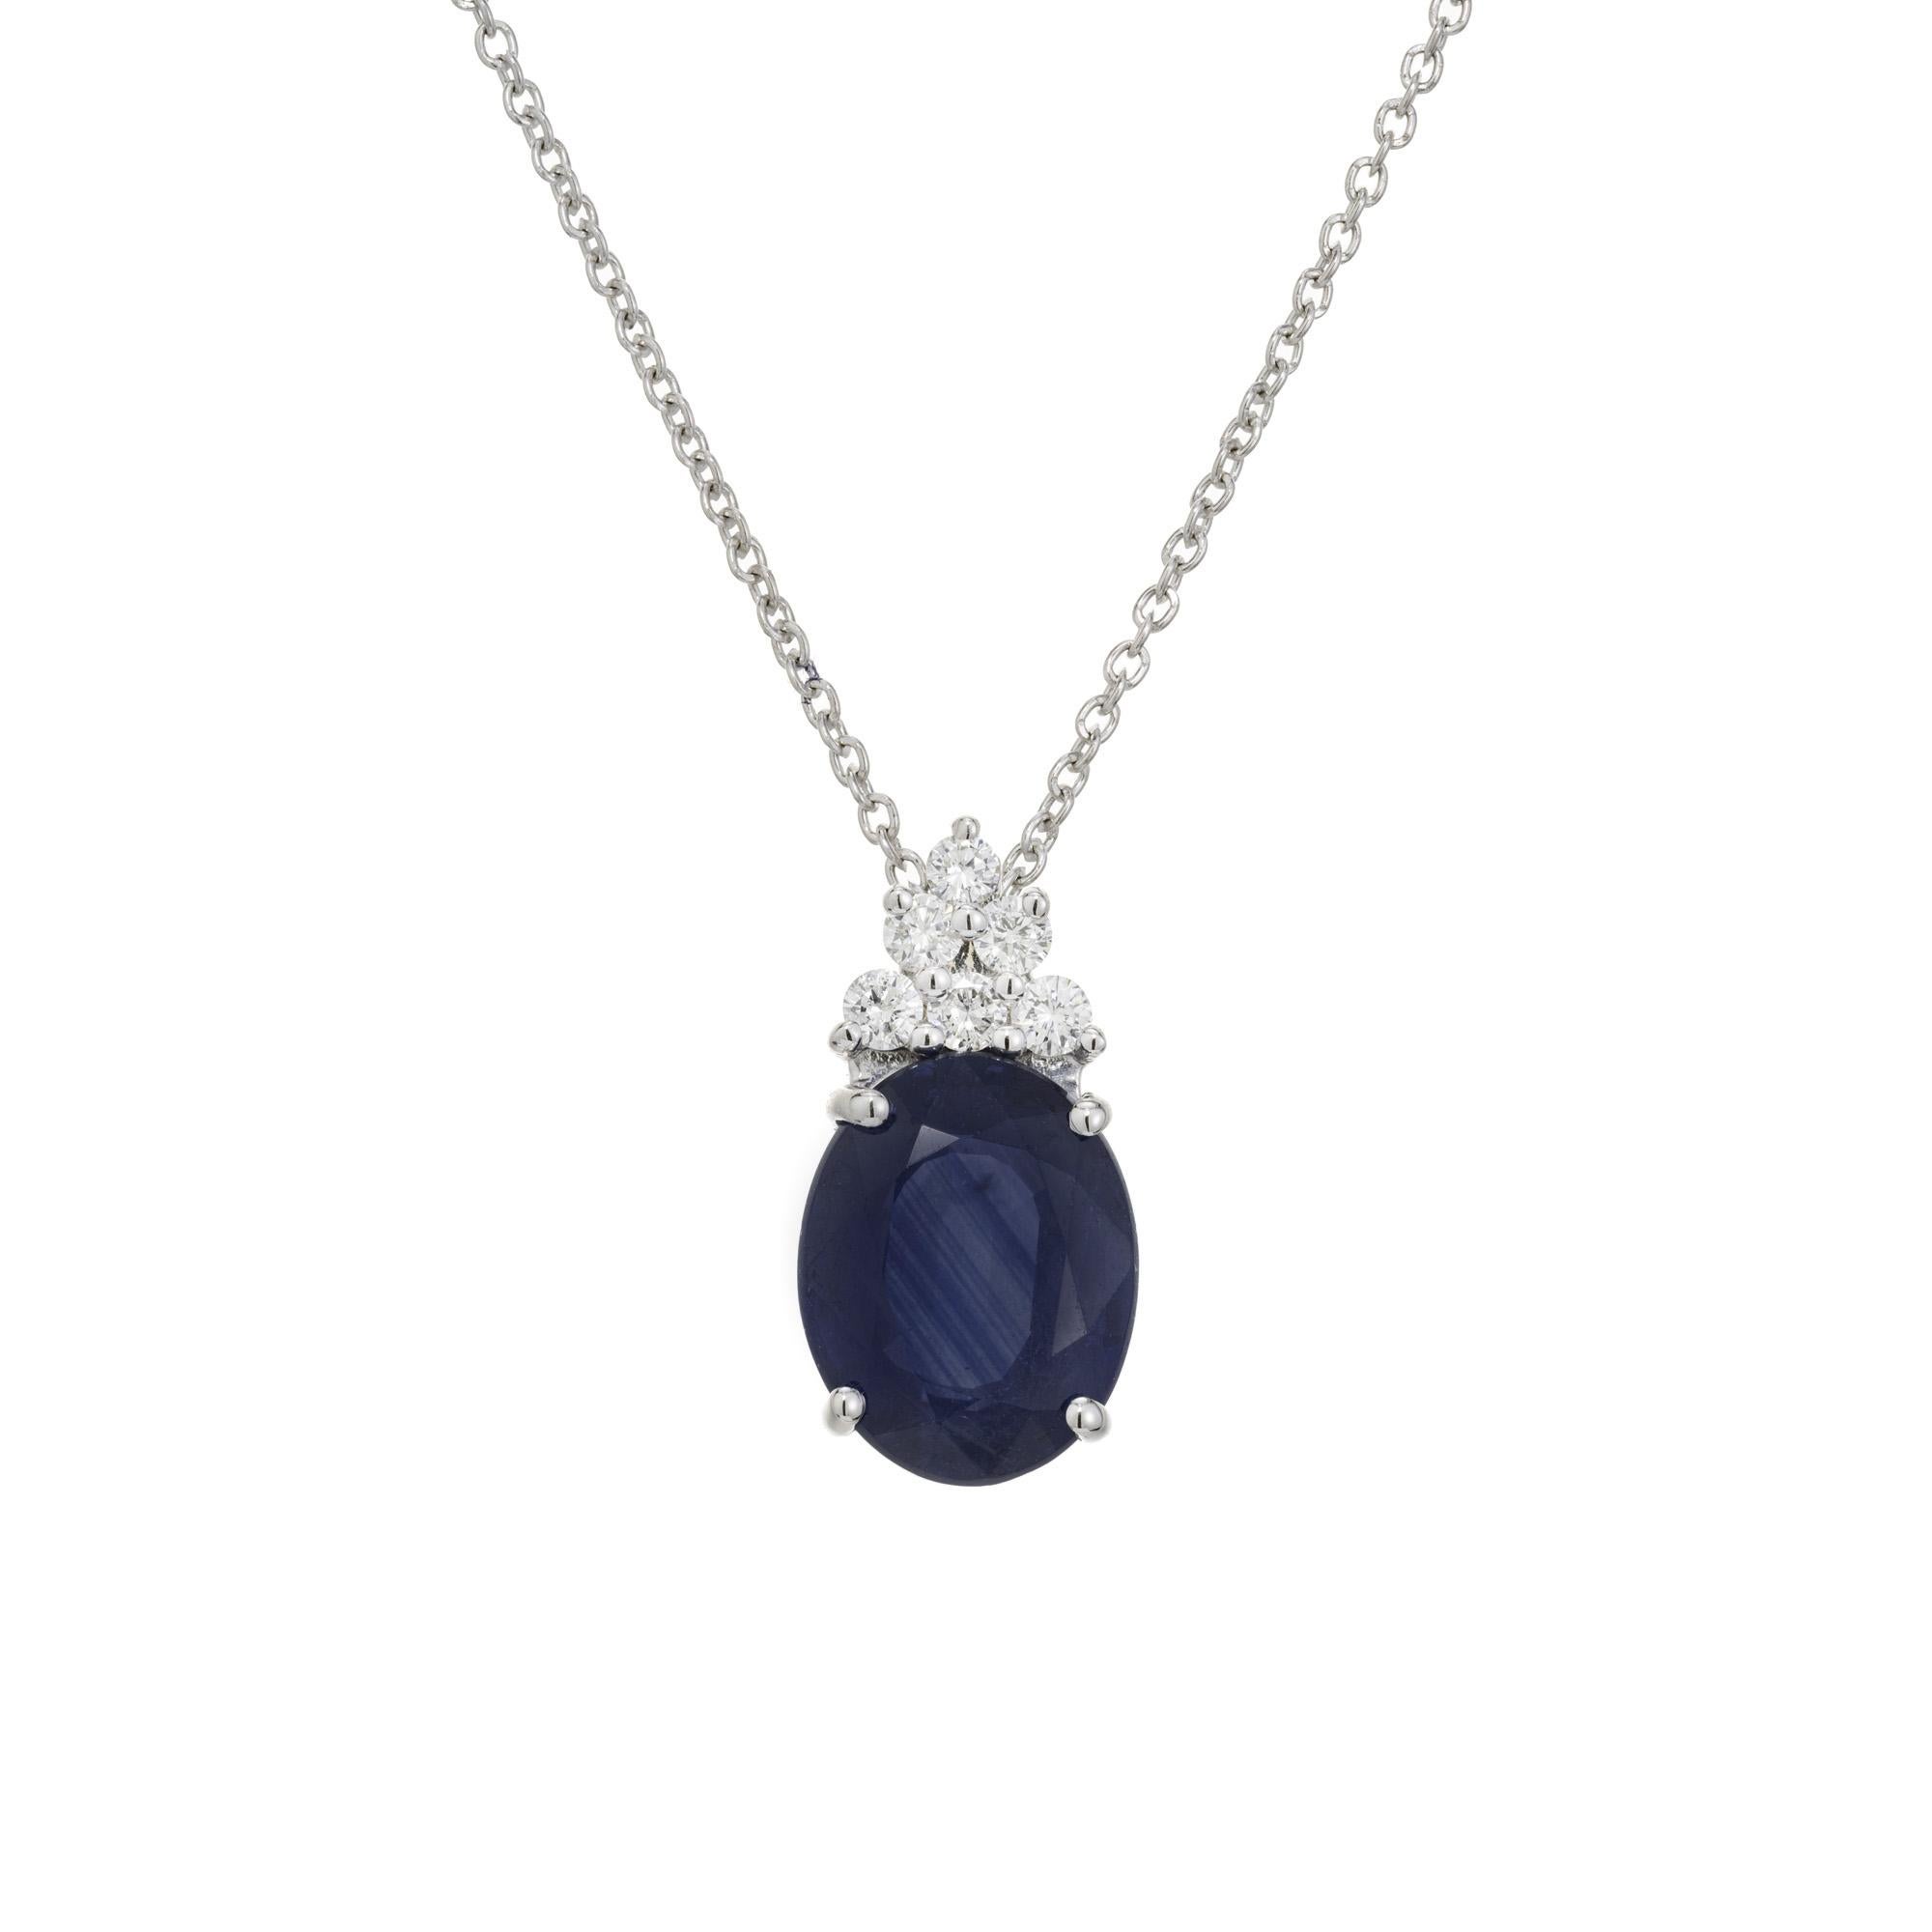 Sapphire and diamond pendant necklace. This 2.67ct oval sapphire is mounted in a 14k white gold simple basket setting with 6 round brilliant cut accent diamonds on the bail. GIA certified it as simple heat only. 16 inch platinum chain. Designed and